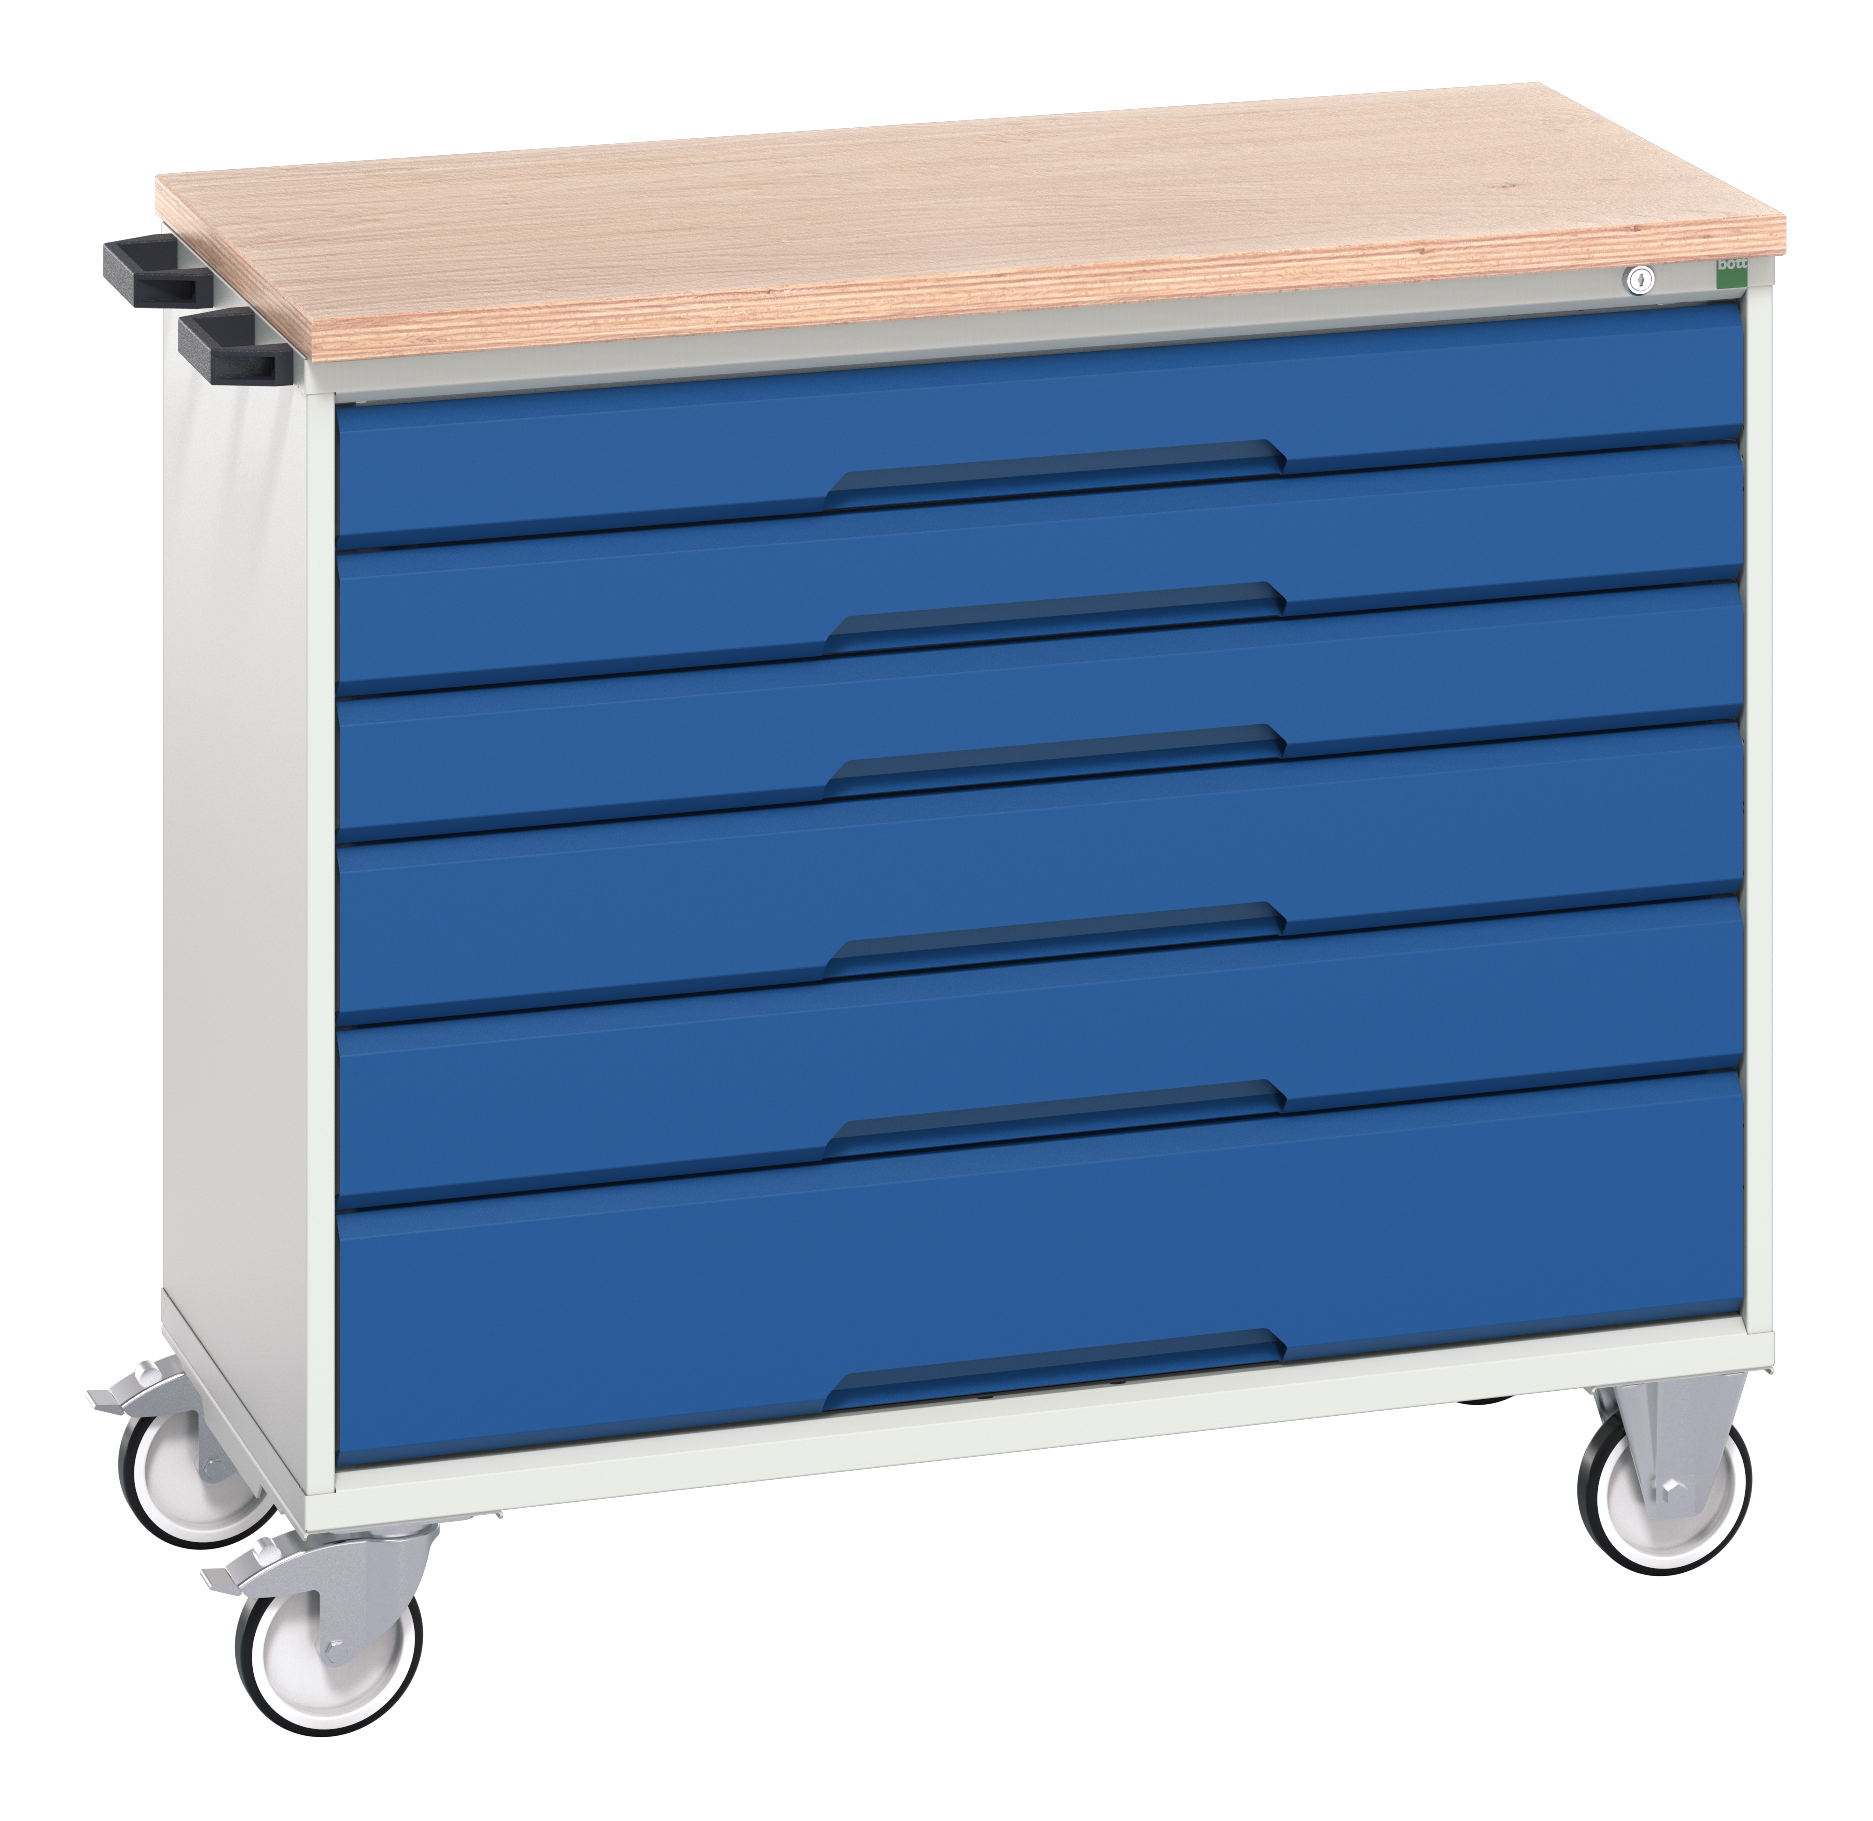 Bott Verso Mobile Drawer Cabinet With 6 Drawers & Multiplex Top - 16927054.11